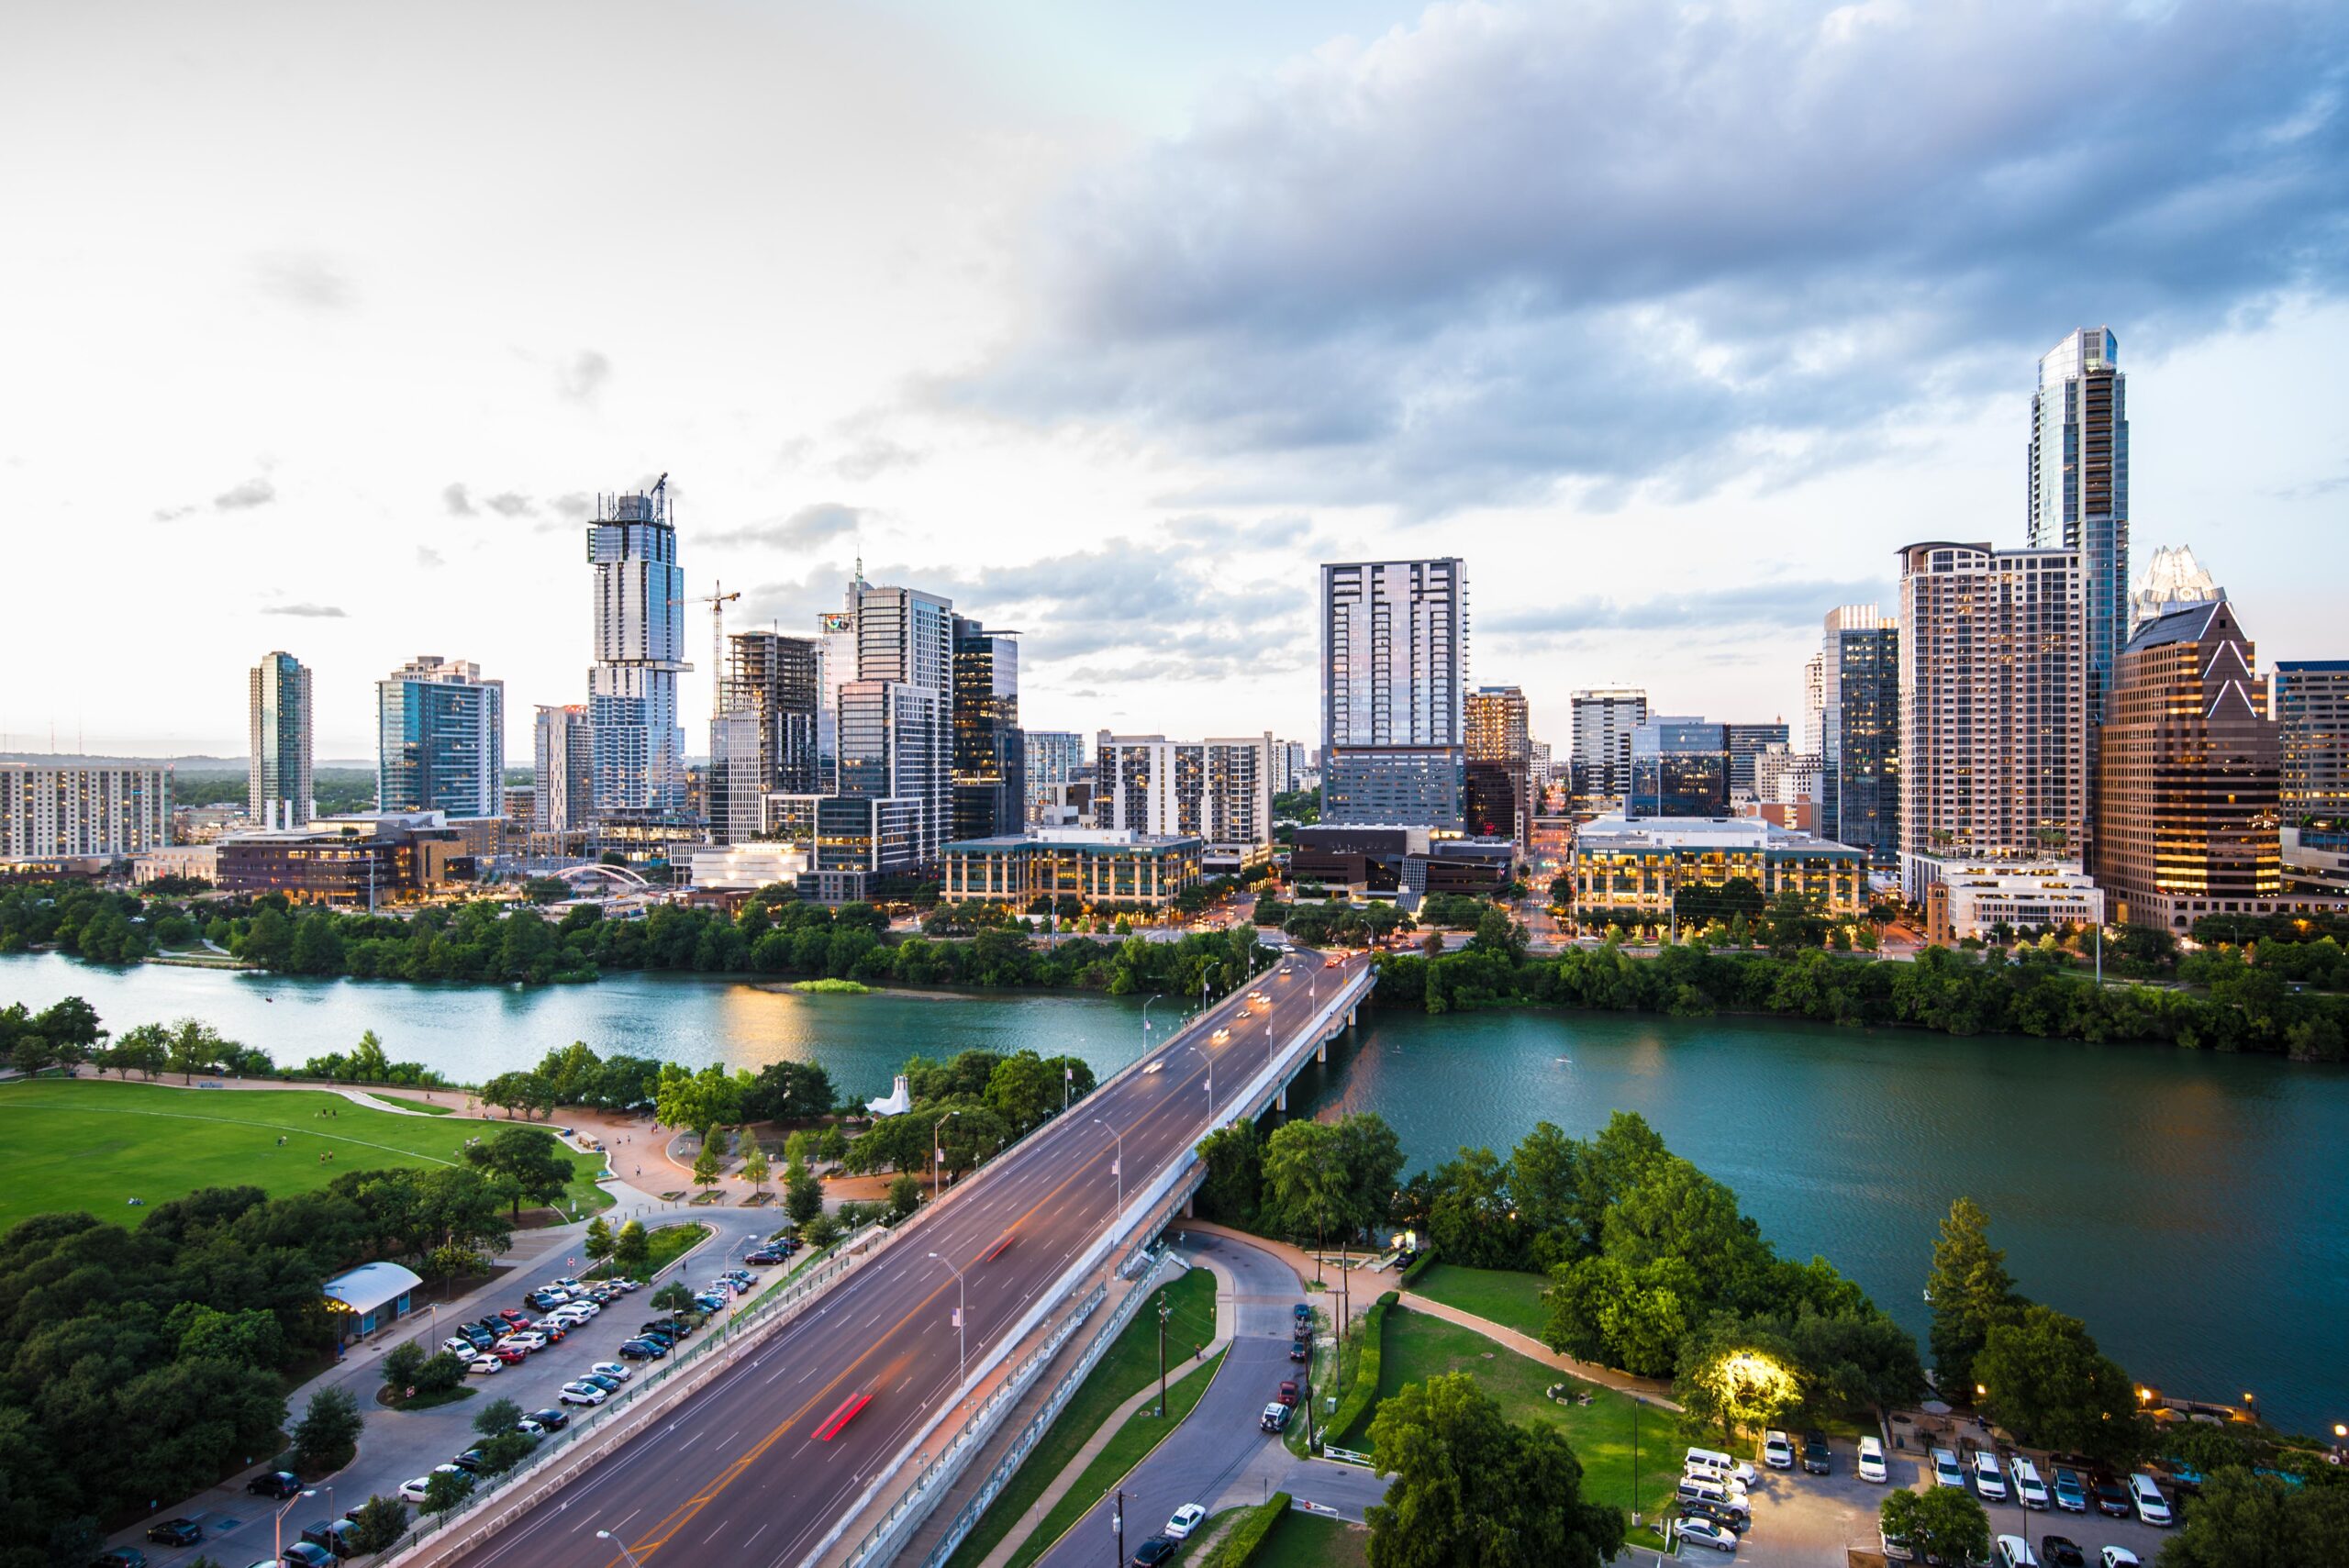 Ranked as the number one city in texas, Austin is one of the best places to live for those wanting a laid-back suburban type of life. Pictured: An aerial view of Austin, Texas.